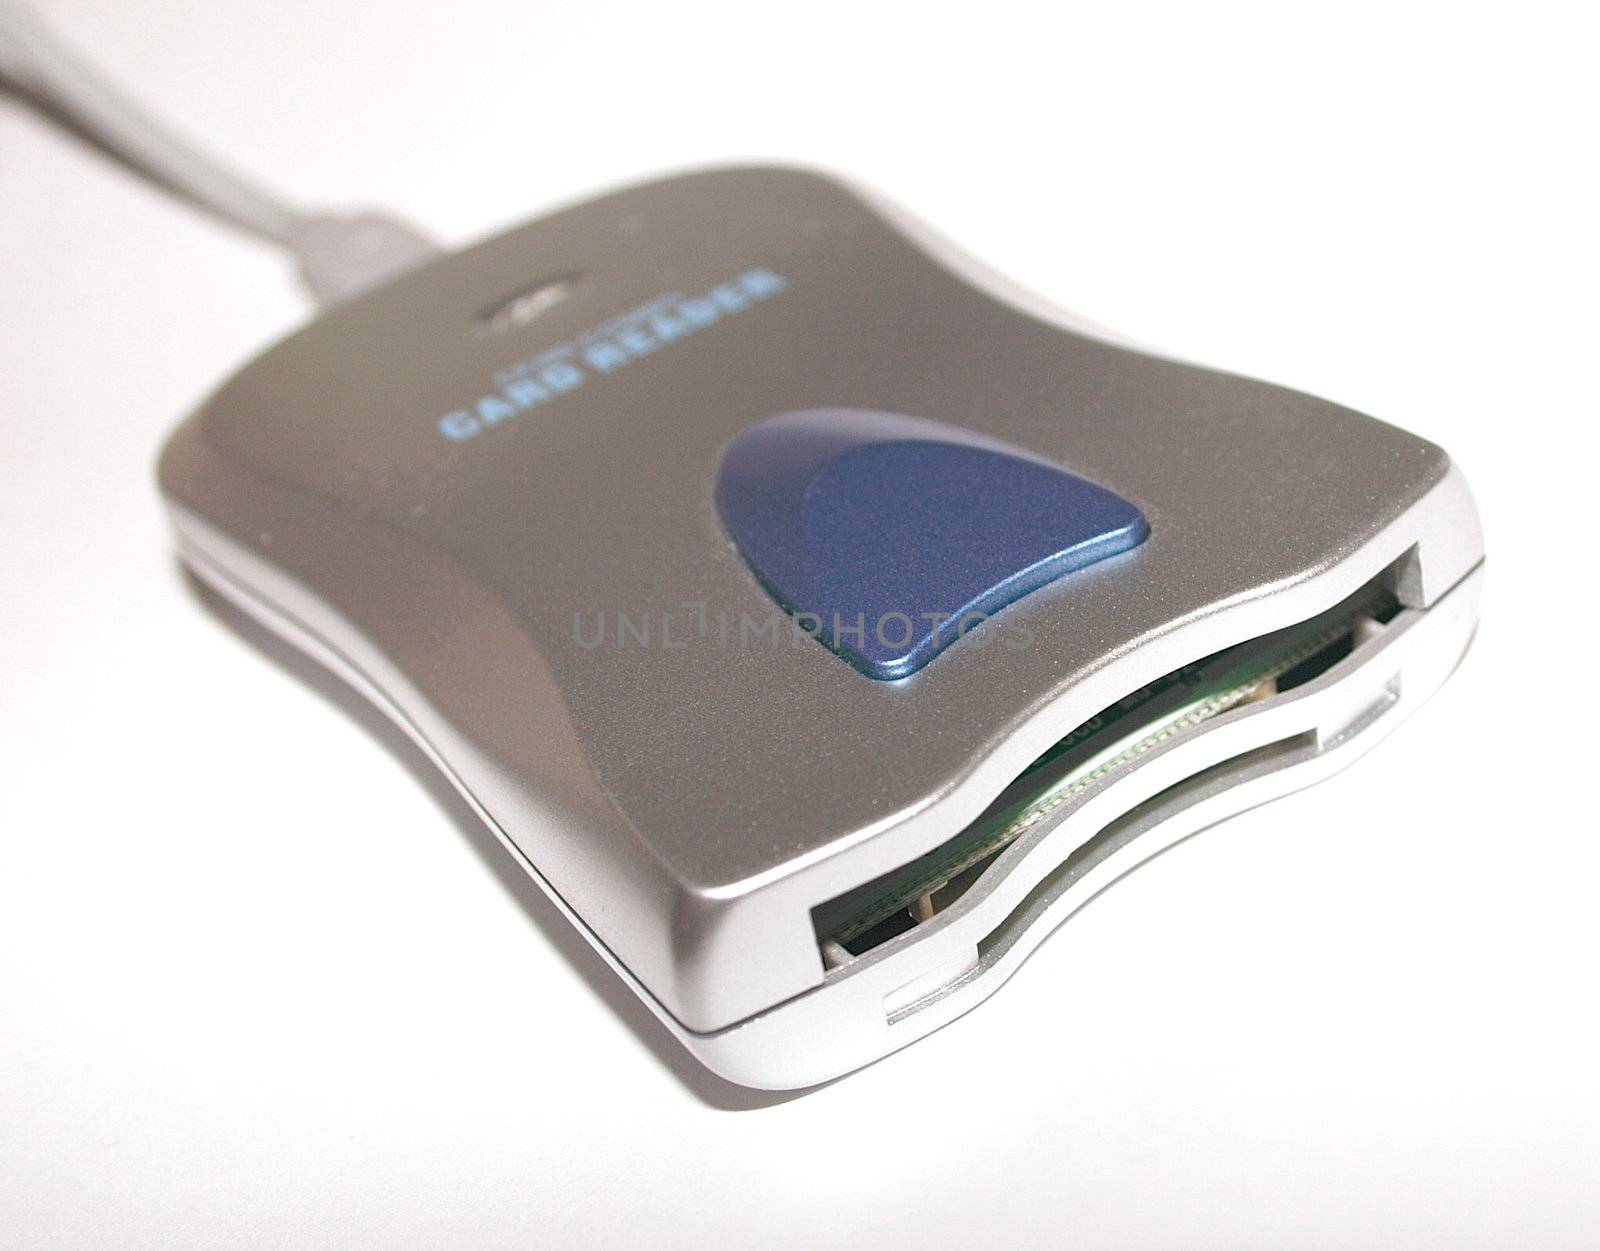 dual format card reader by leafy